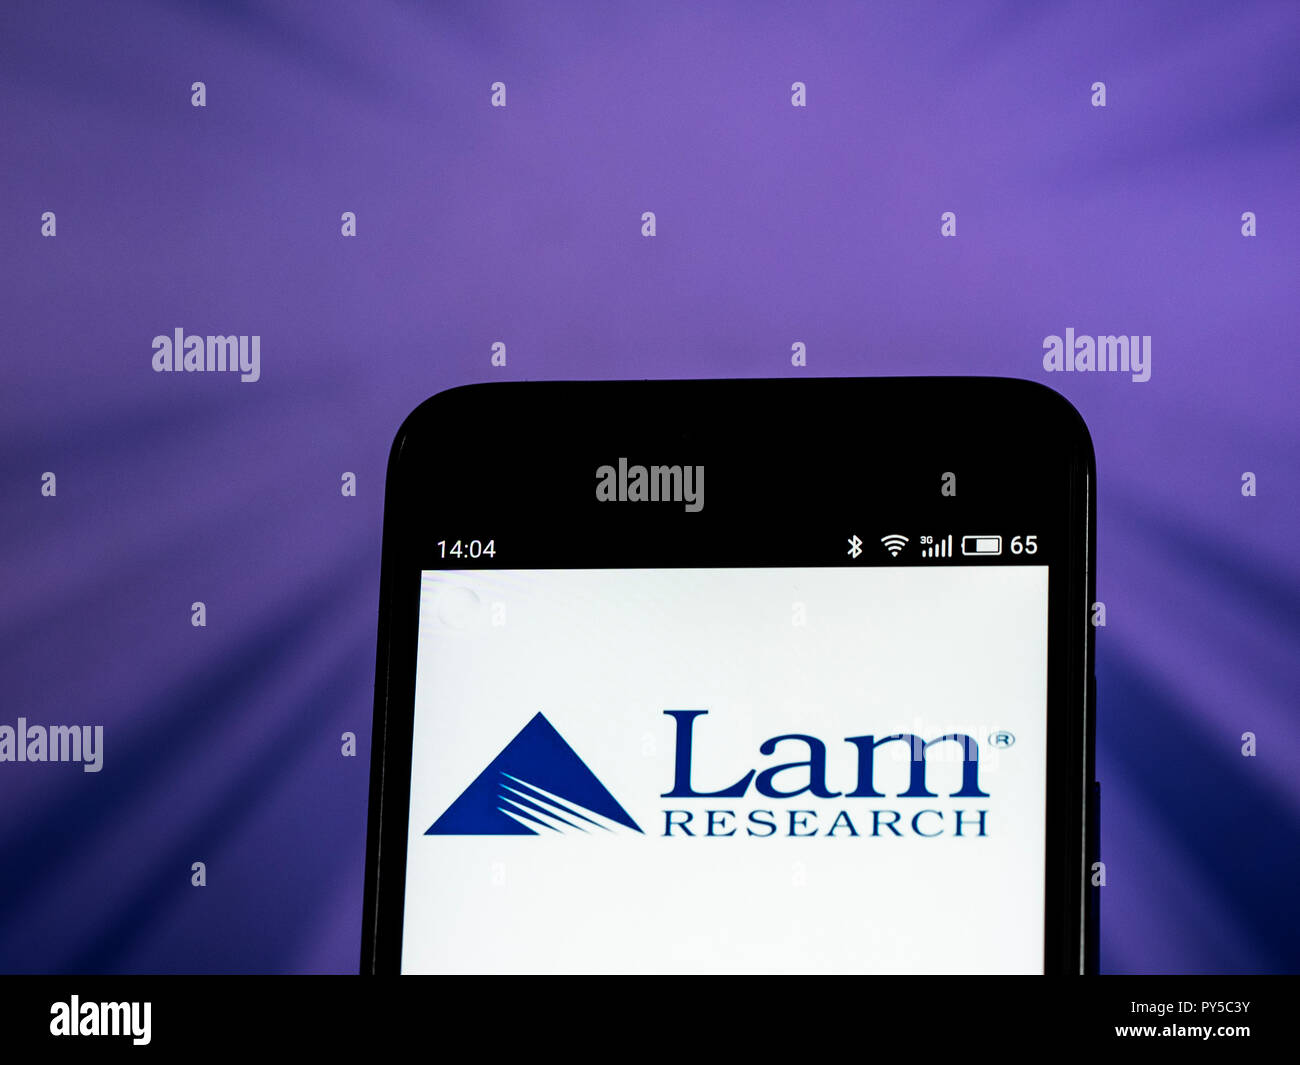 Lam Research Corporation logo seen displayed on smart phone. Lam Research Corporation is an American corporation that engages in the design, manufacture, marketing, and service of semiconductor processing equipment used in the fabrication of integrated circuits. Stock Photo